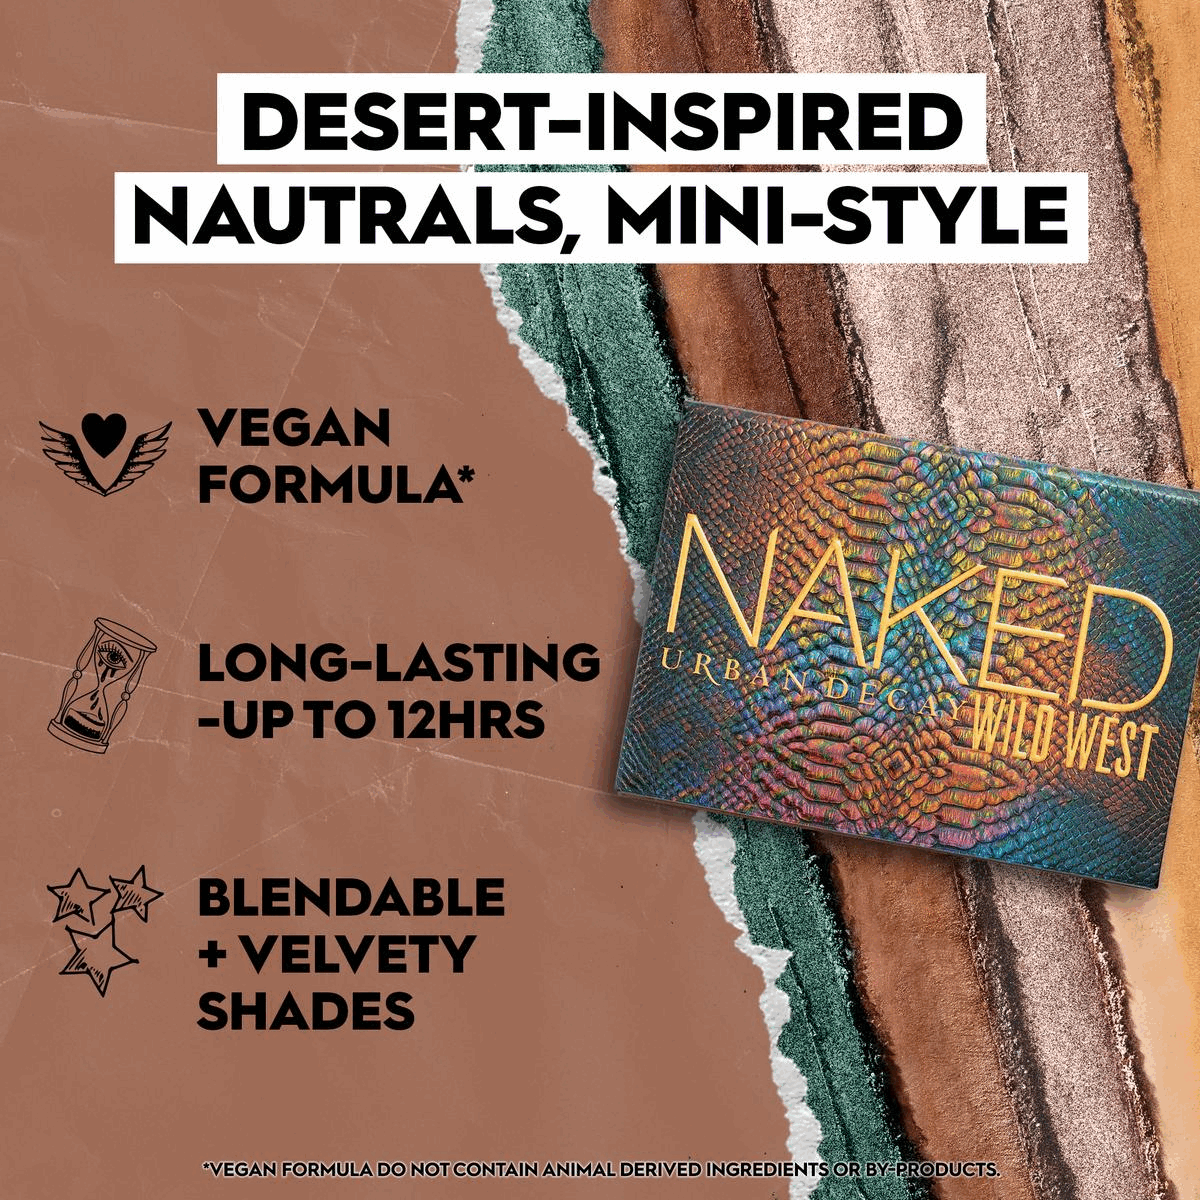 Image 1, Desert inspired natural, mini style. Vegan formula, long lasting, up to 24 hours, blendable and velvety shades. Image 2, UK No1 Vegan brand. Image 3, Swatches on an arm